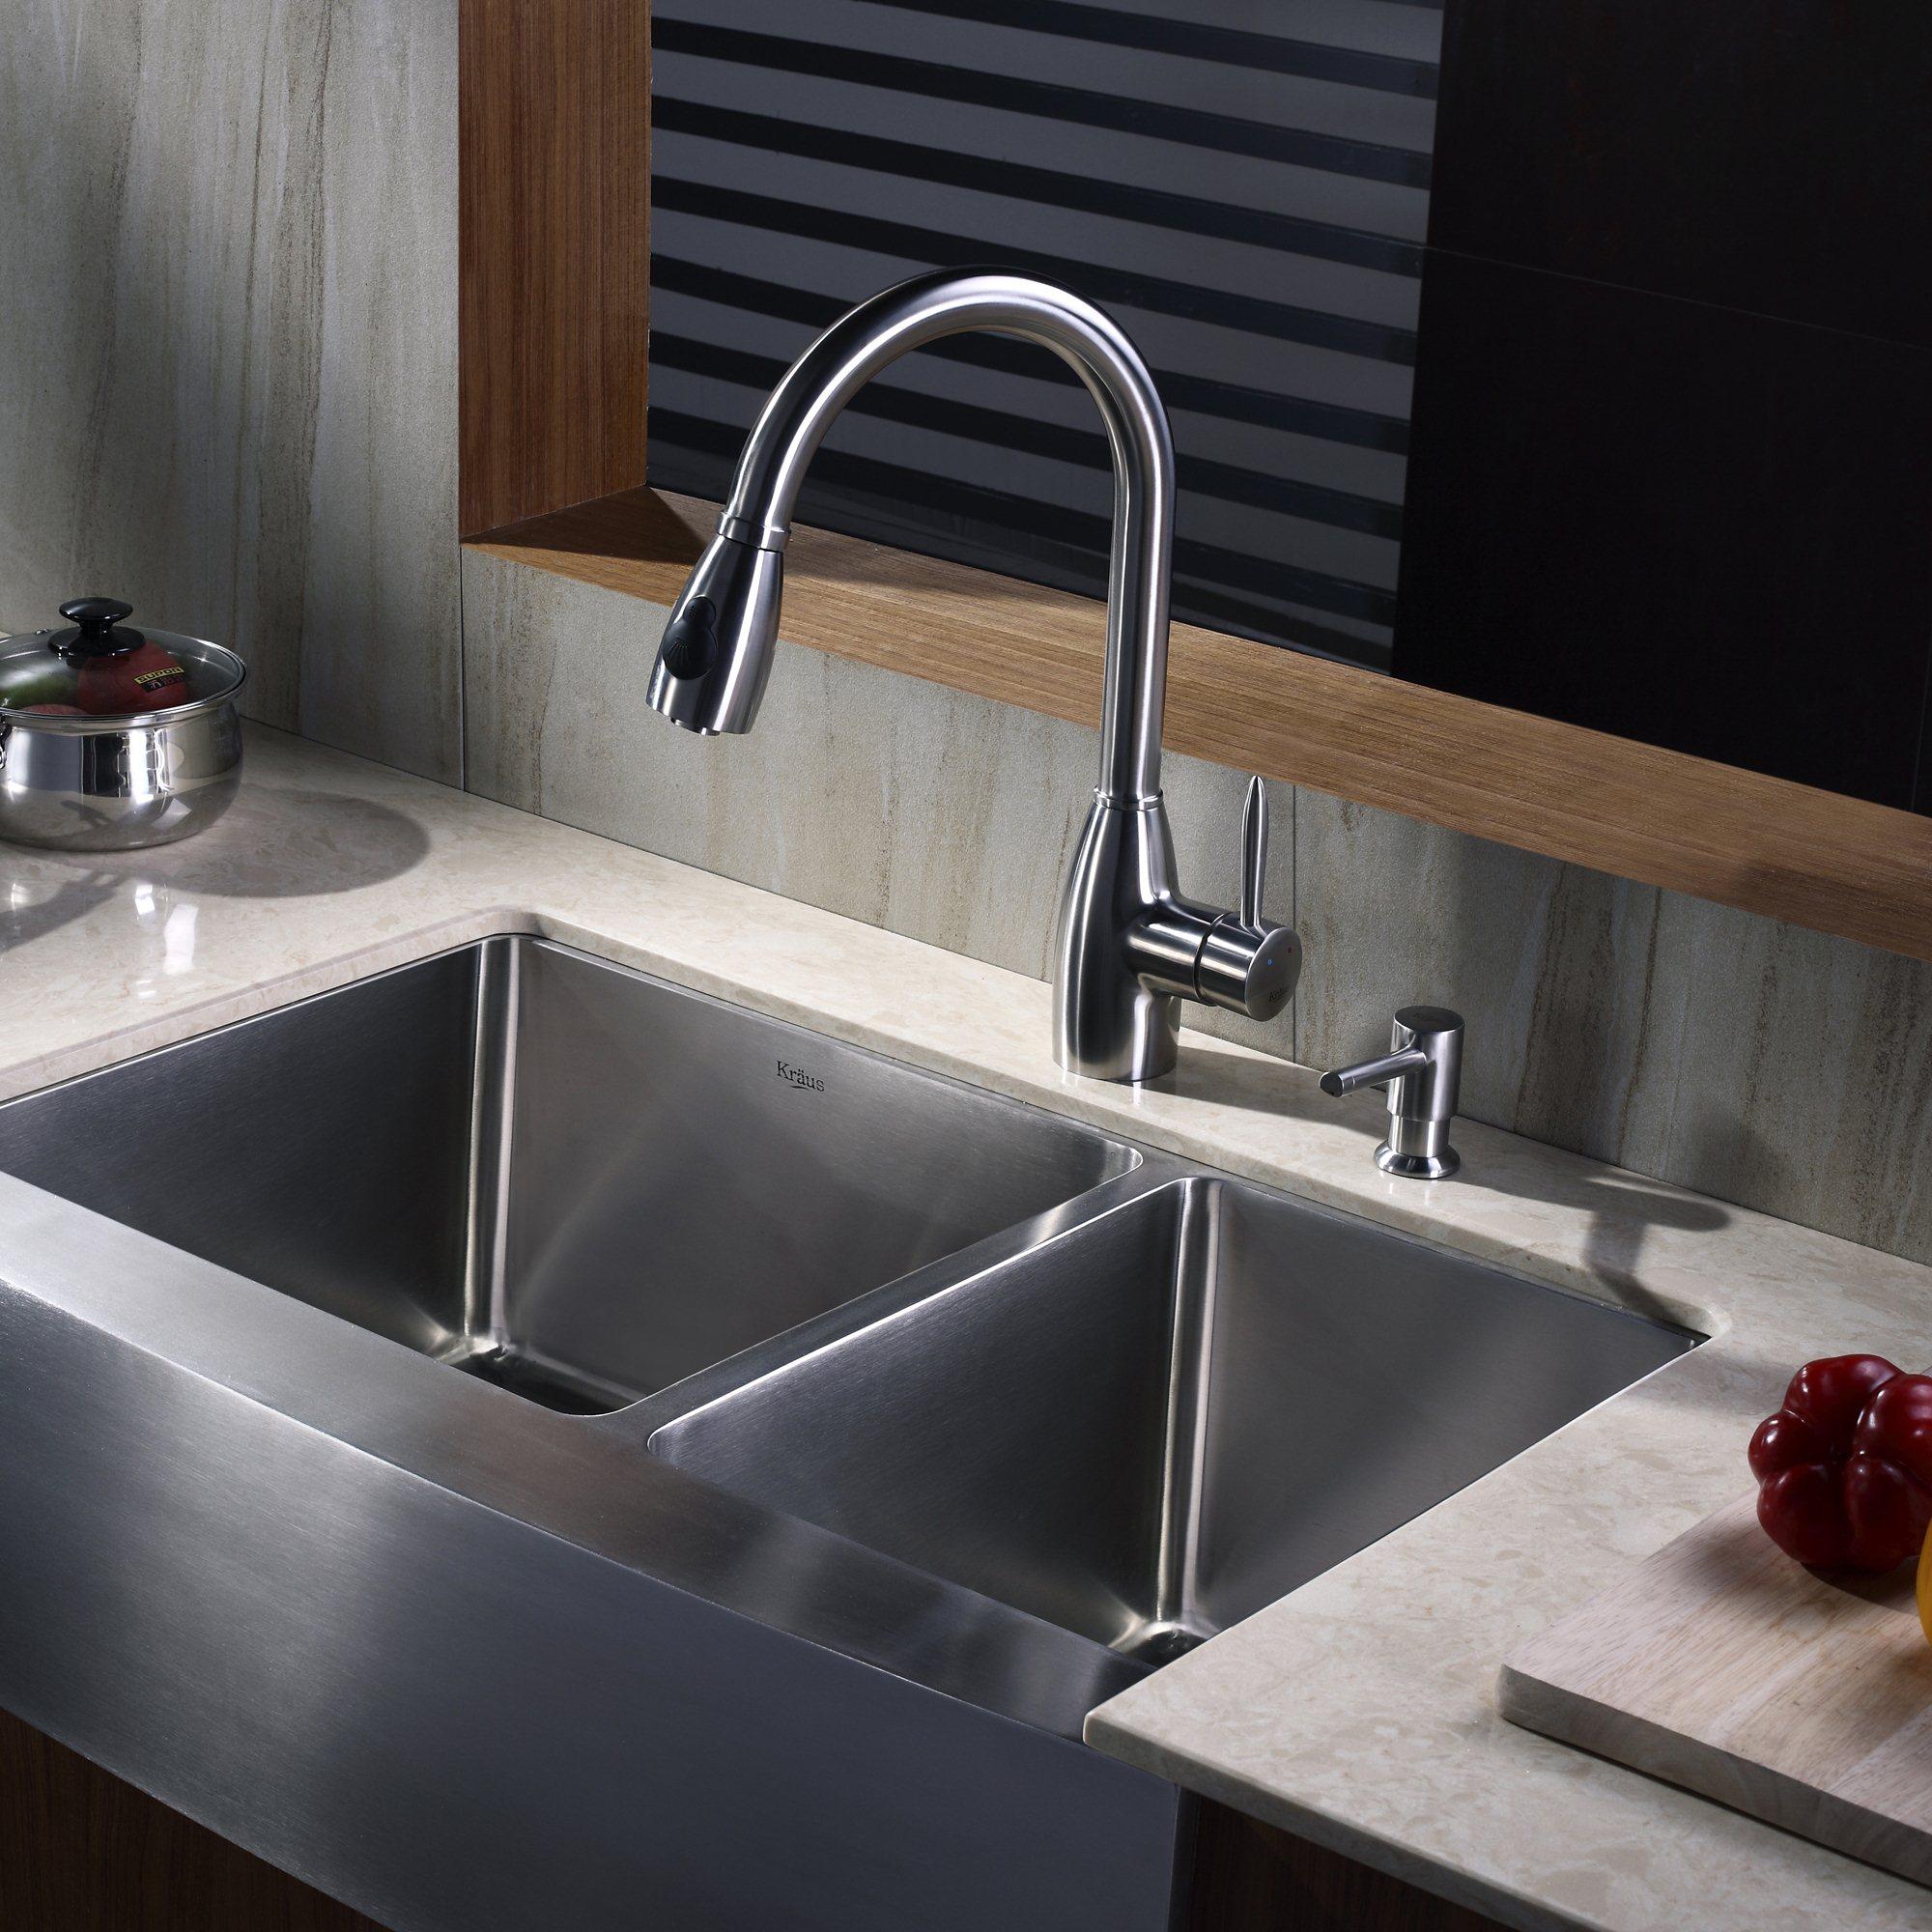 https://ak1.ostkcdn.com/images/products/4389936/Kraus-Kitchen-Combo-Set-Stainless-Steel-Farmhouse-Sink-with-Faucet-a6913d12-1504-4c9a-8e3a-17417930166d.jpg